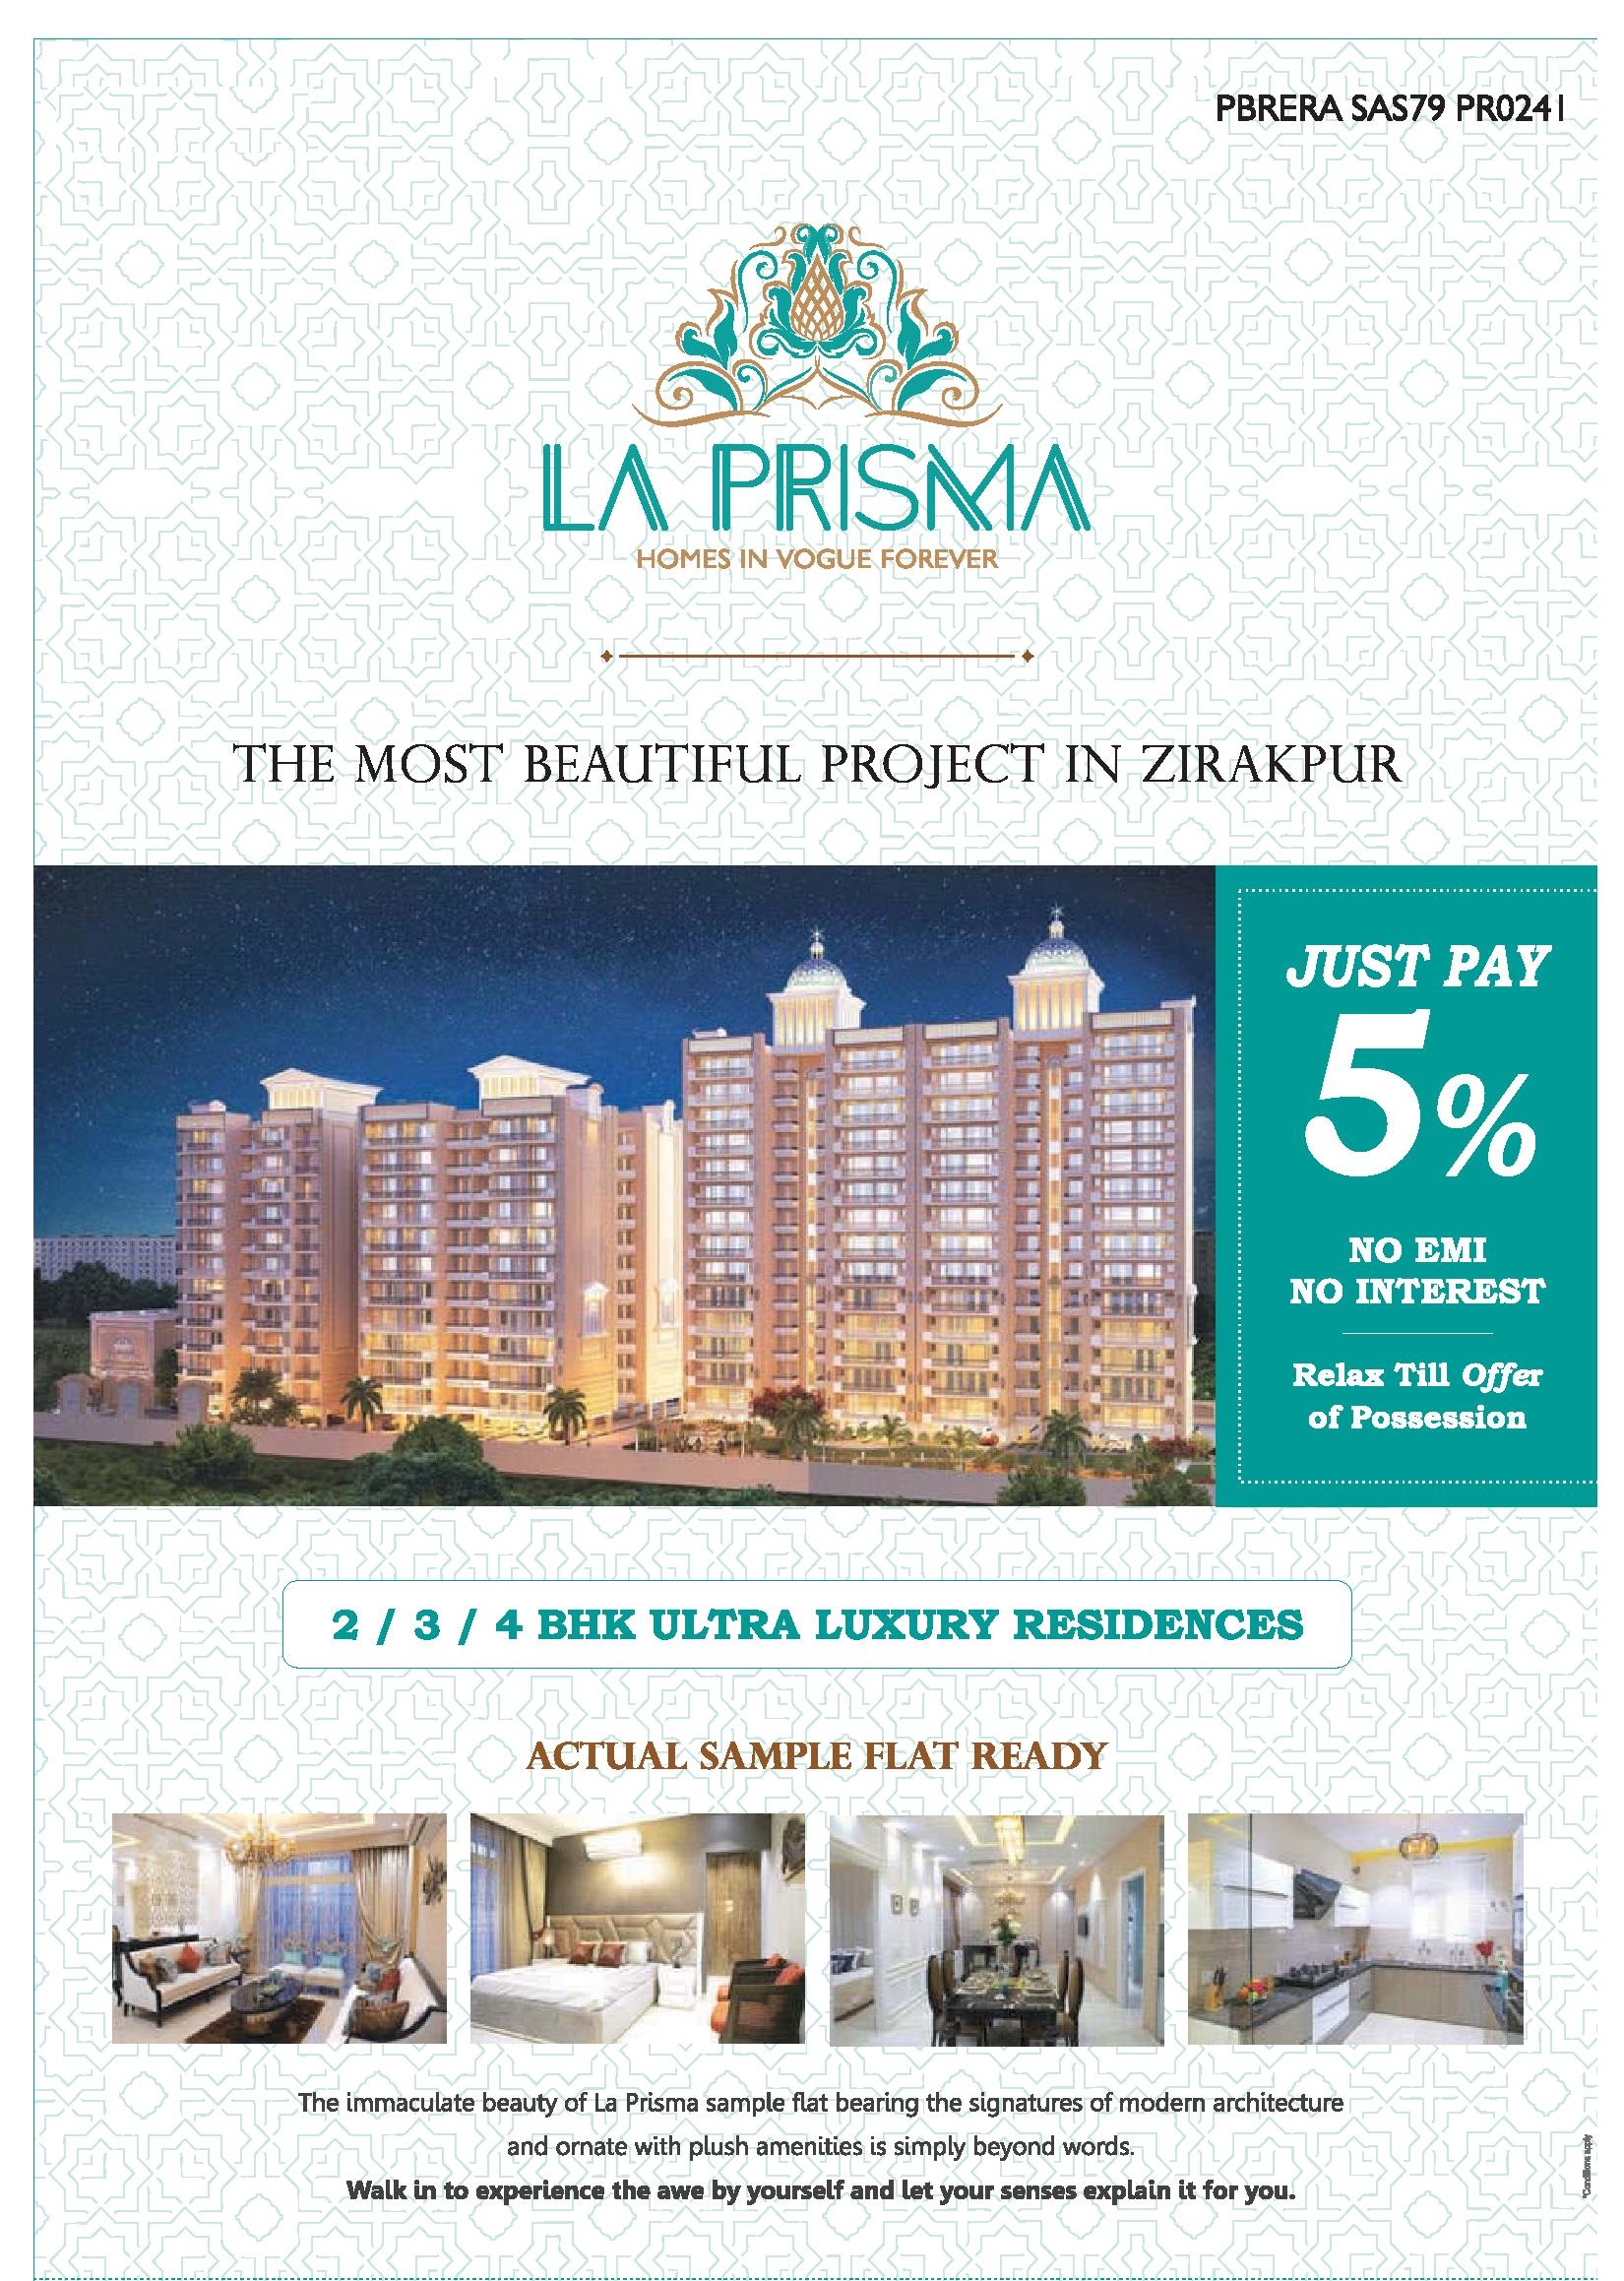 Avail 2/3/4 bhk ultra luxury residences at United La Prisma in Chandigarh Update